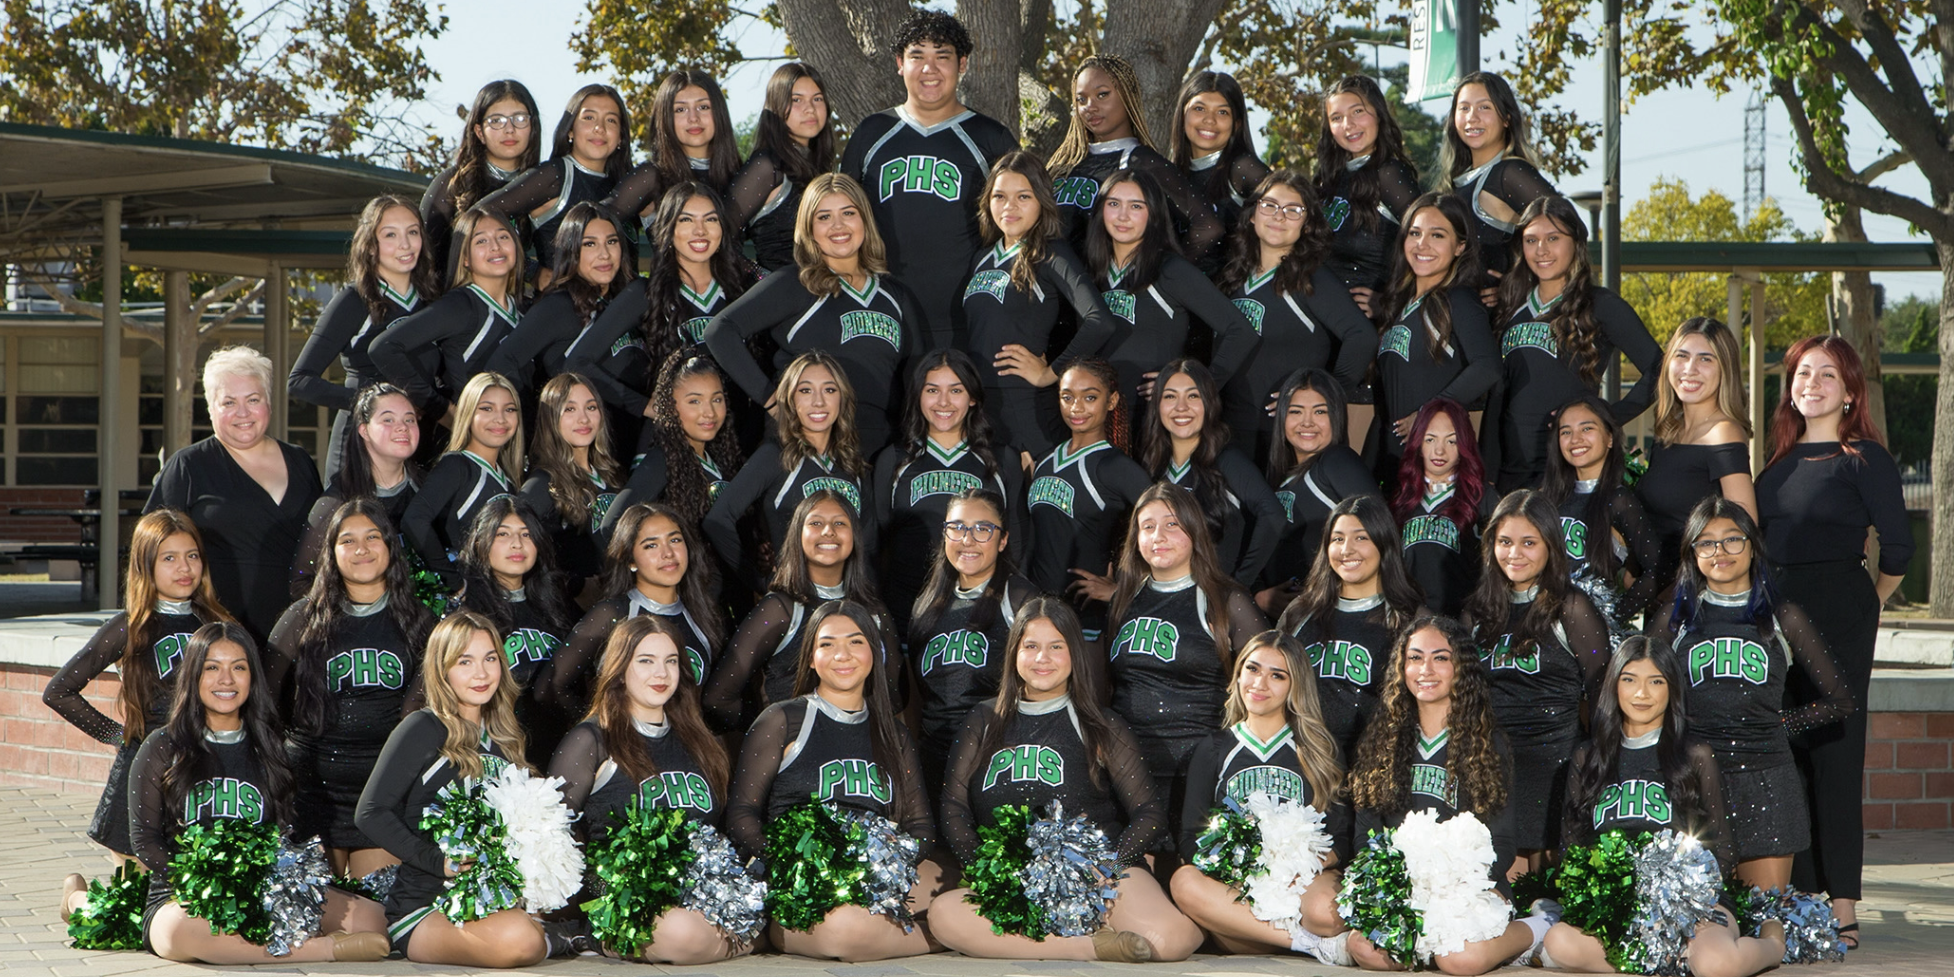 song cheer and dance team